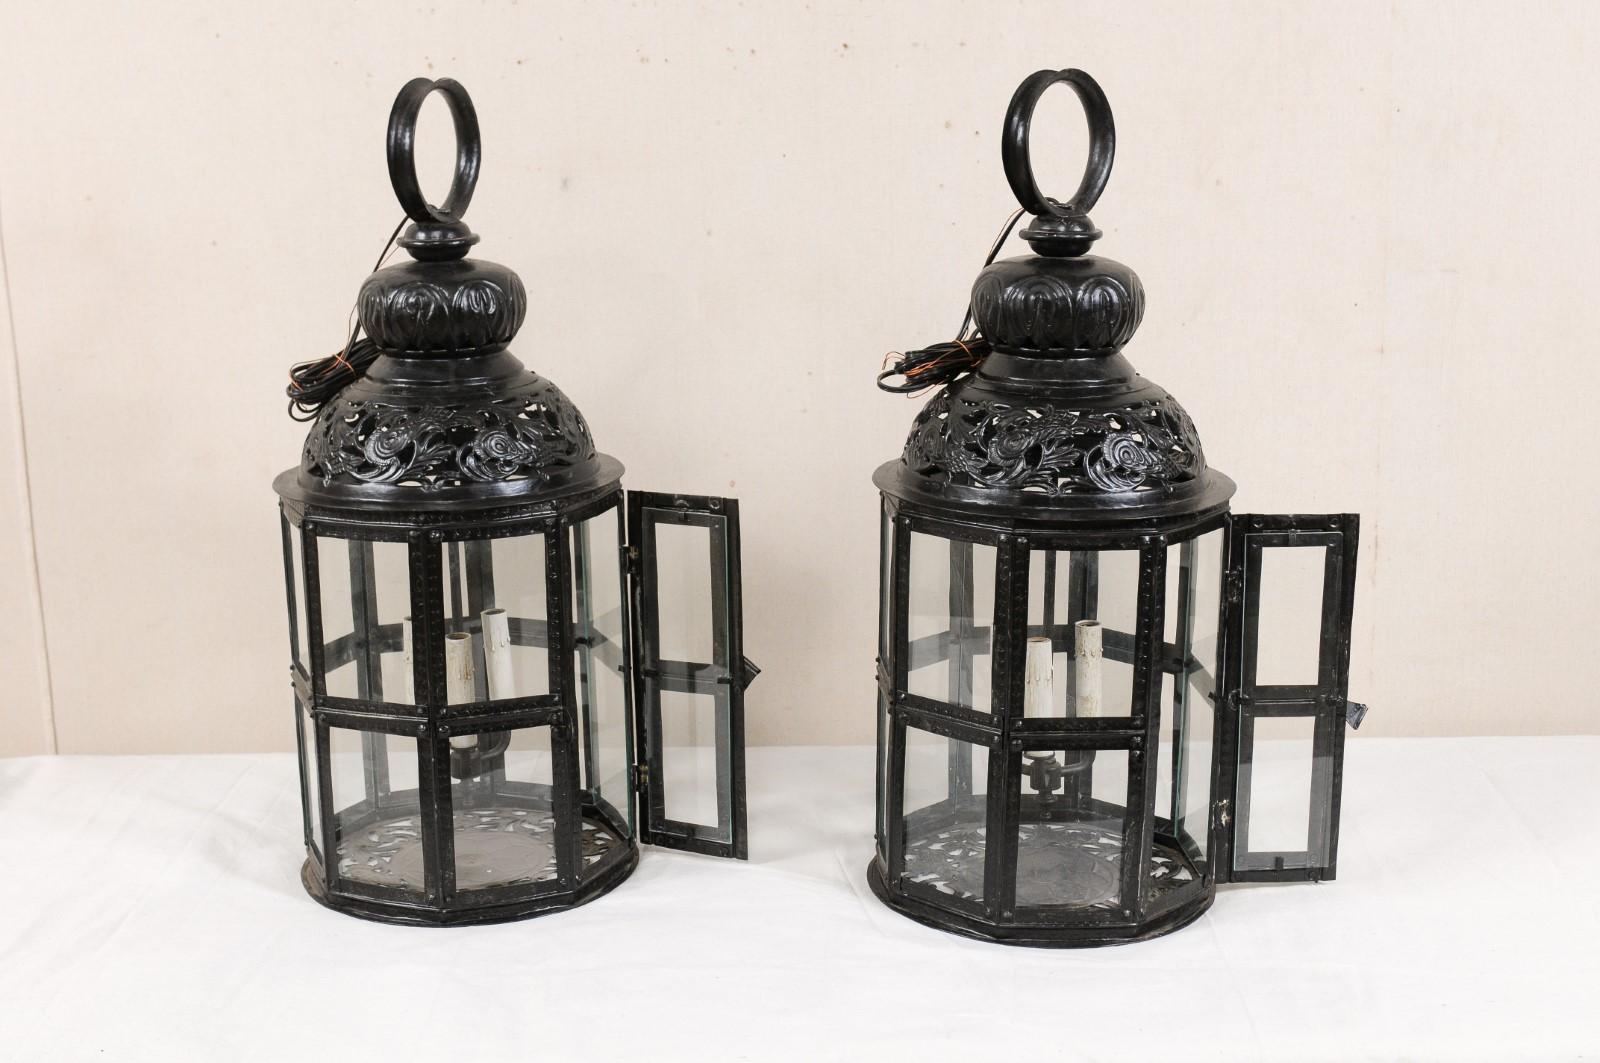 Pair of Three-Light Moroccan-Inspired European Lanterns in Black Color w/Glass For Sale 2